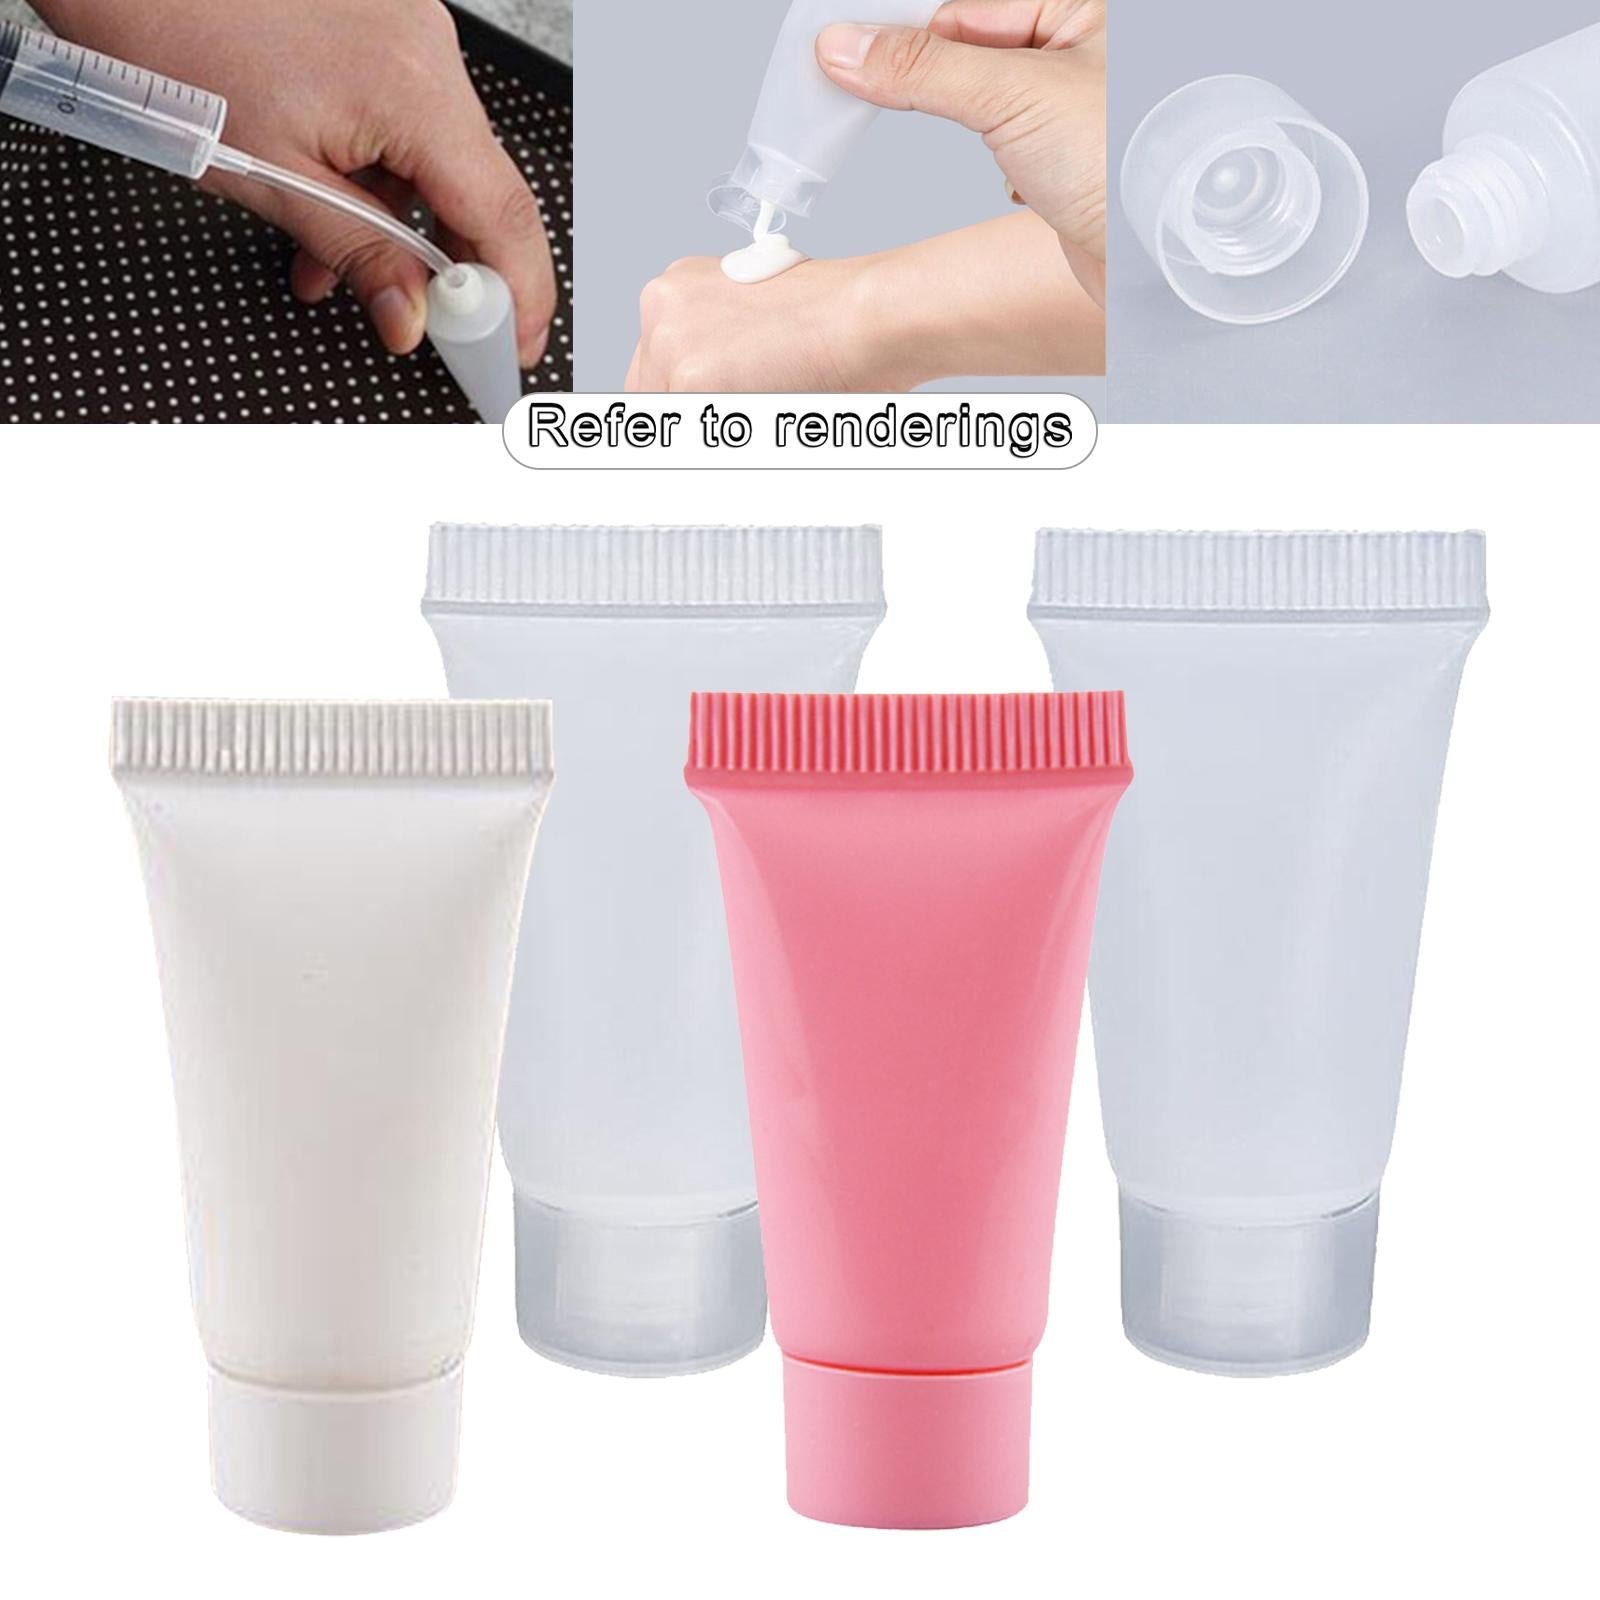 100Pcs Empty Soft Tubes Bottle 5ml with Caps for Makeup Cream white